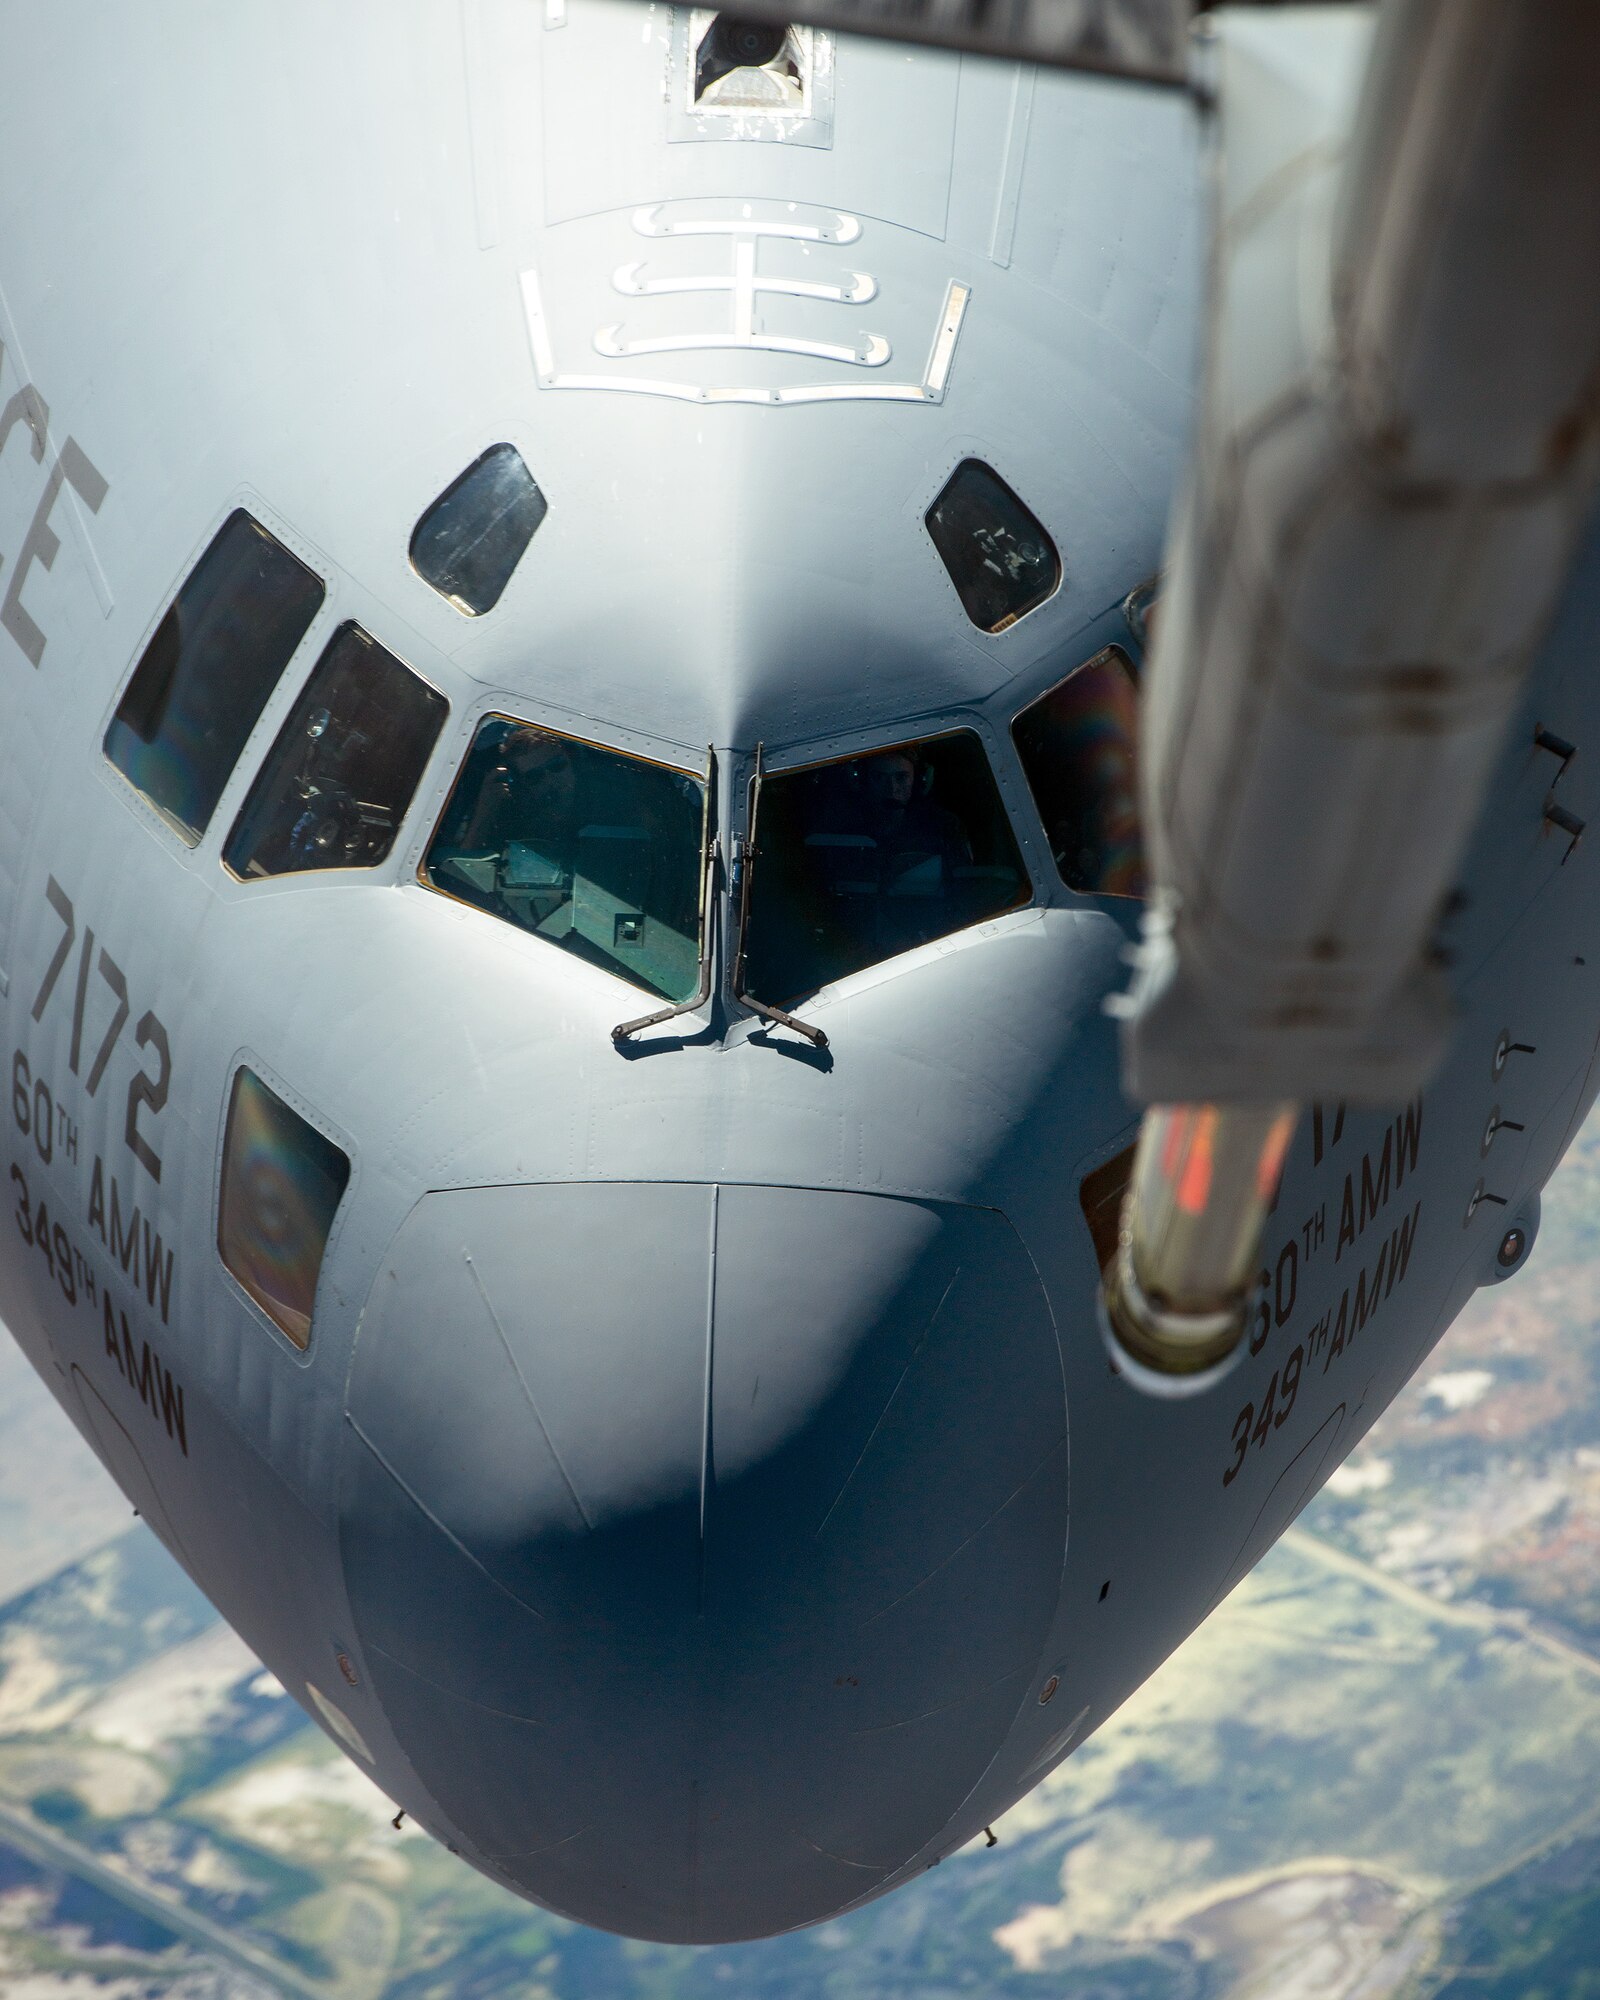 A C-17 Globemaster III from the 301st Airlift Squadron, 349th Air Mobility Wing, Travis Air Force Base, Calif., is refueled by a KC-10 Extender, July 20, 2017. The C-17 Globemaster III was conducting a local training mission in Northern California. (U.S. Air Force photo Louis Briscese)